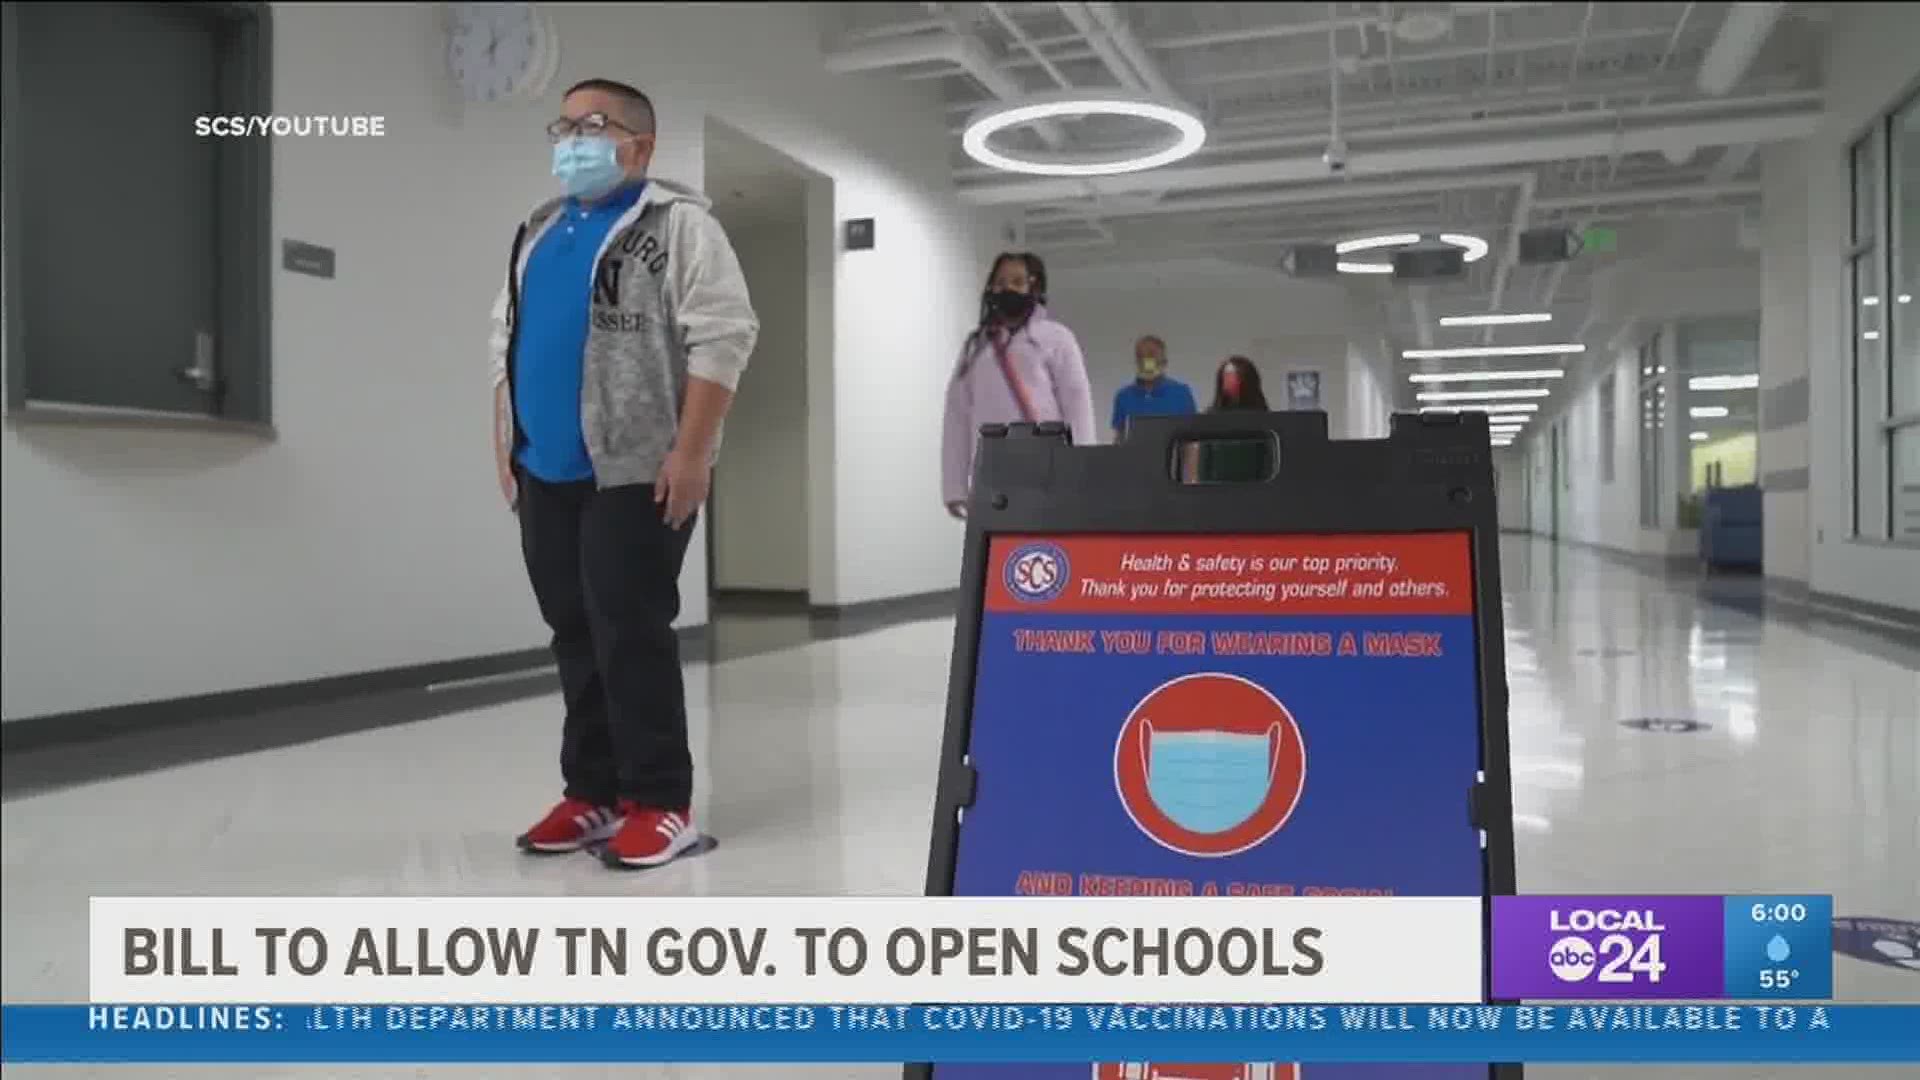 If passed, Governor Lee could order Shelby County Schools to reopen.